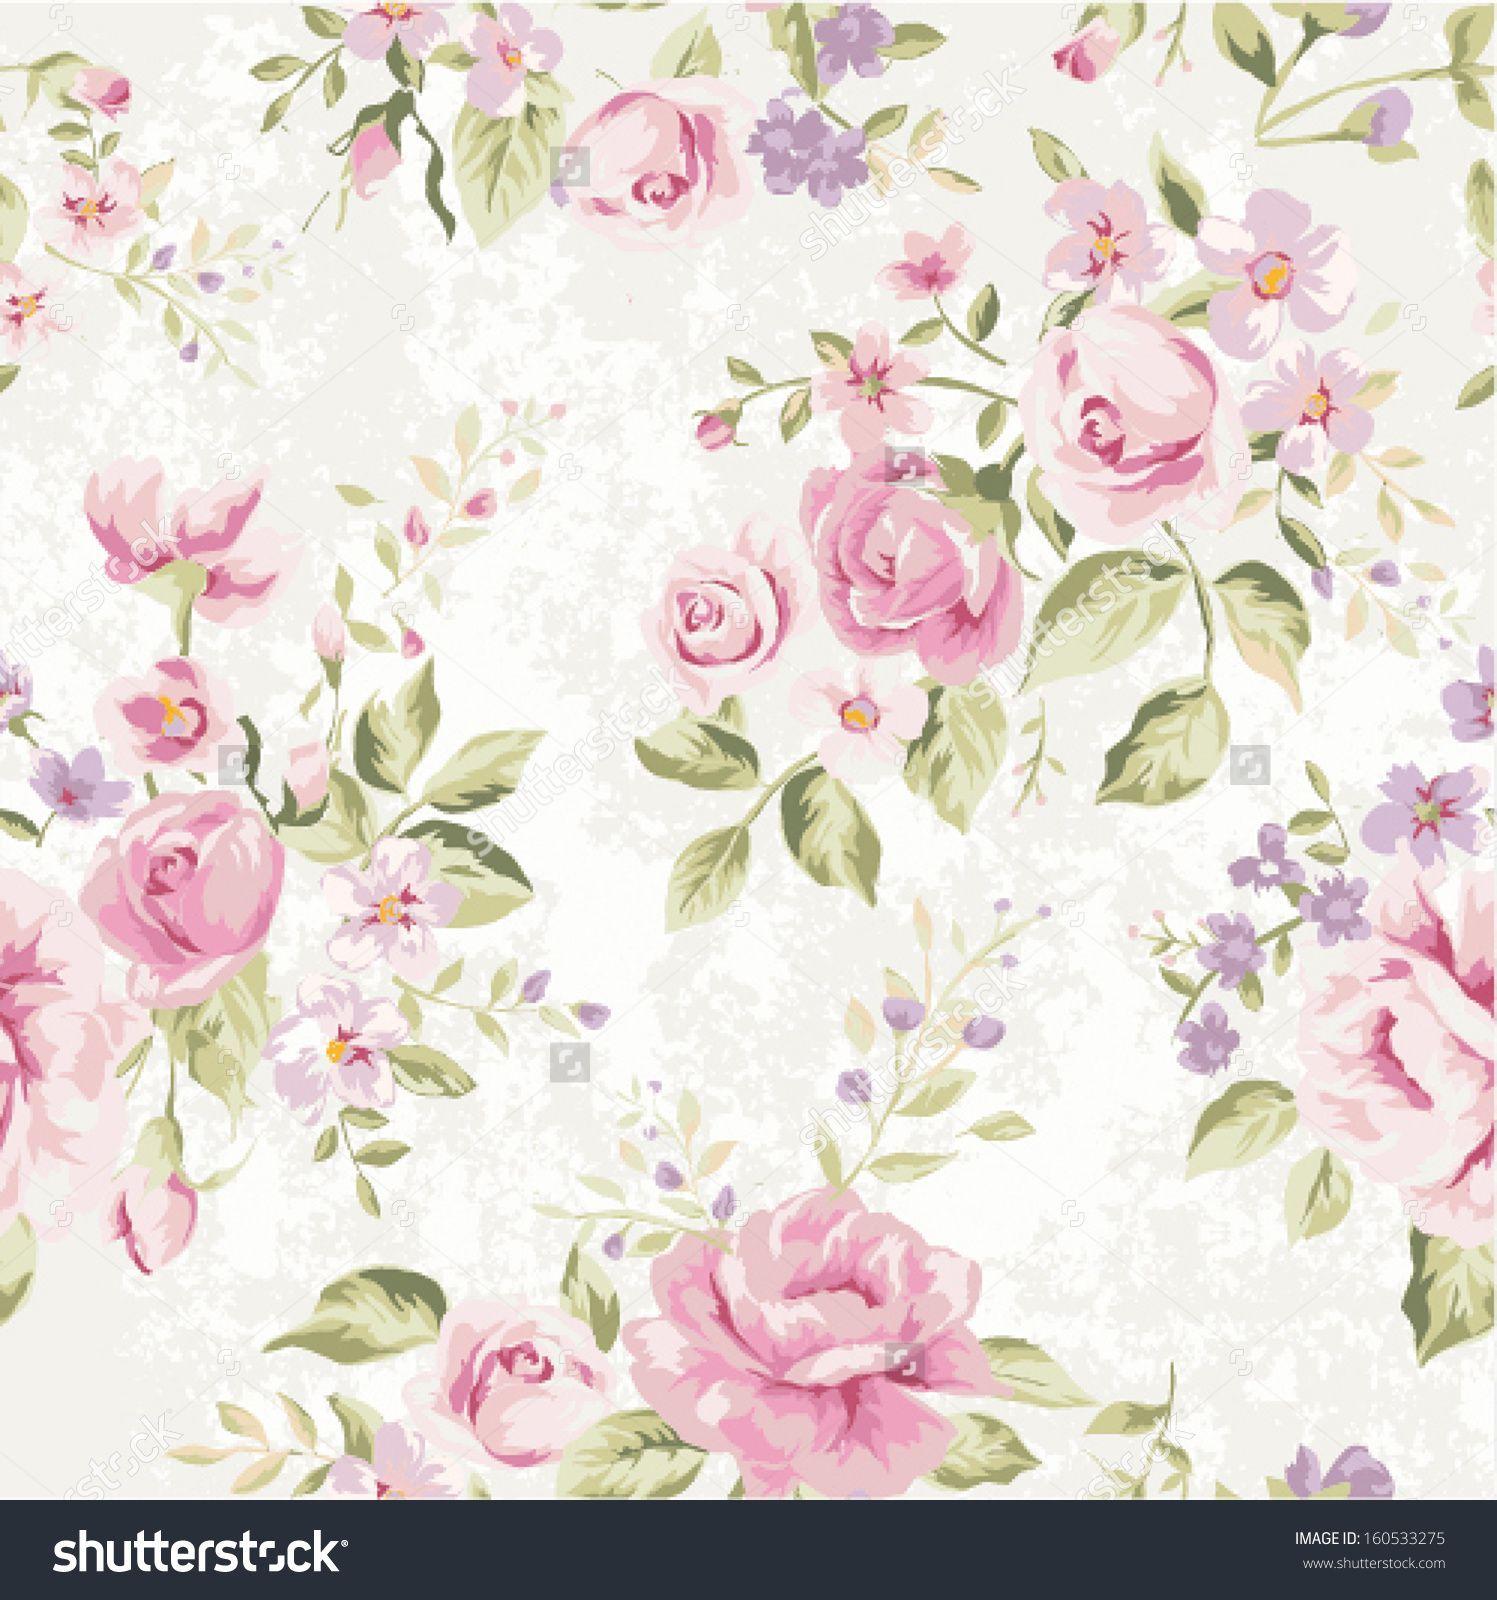 Vintage Flowers Wallpaper Image Photo Picture Background